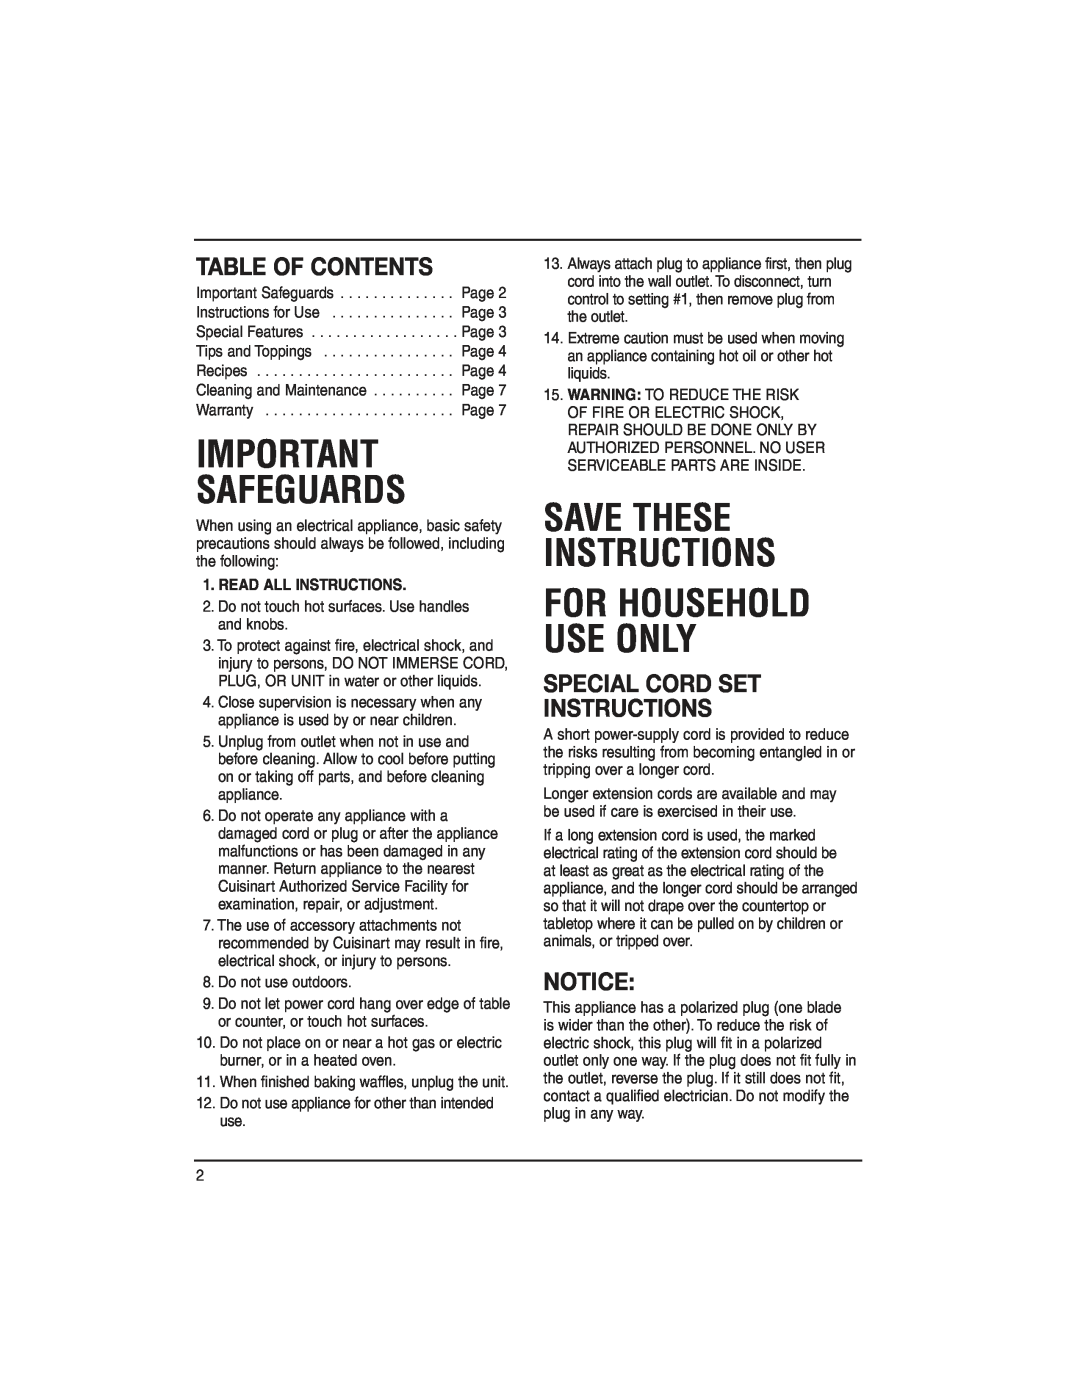 Cuisinart WMR-H manual Table Of Contents, Special Cord Set Instructions, Safeguards, Save These Instructions 